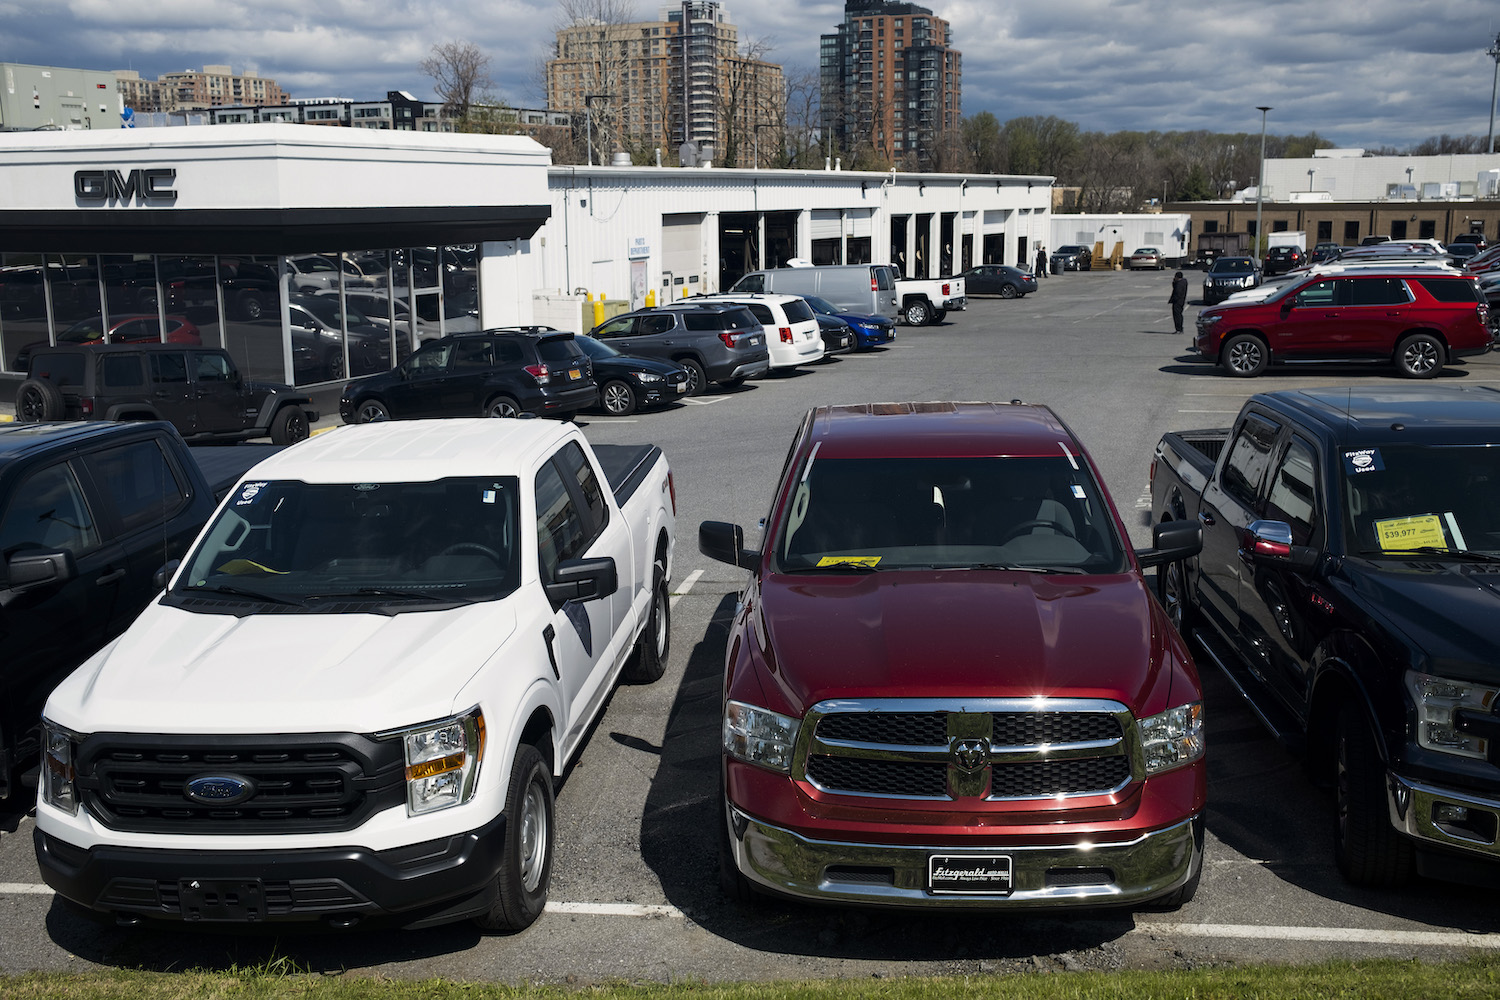 A row of reliable used pickup trucks including a Dodge Ram 1500 and Ford F-150, parked in a dealership lot.